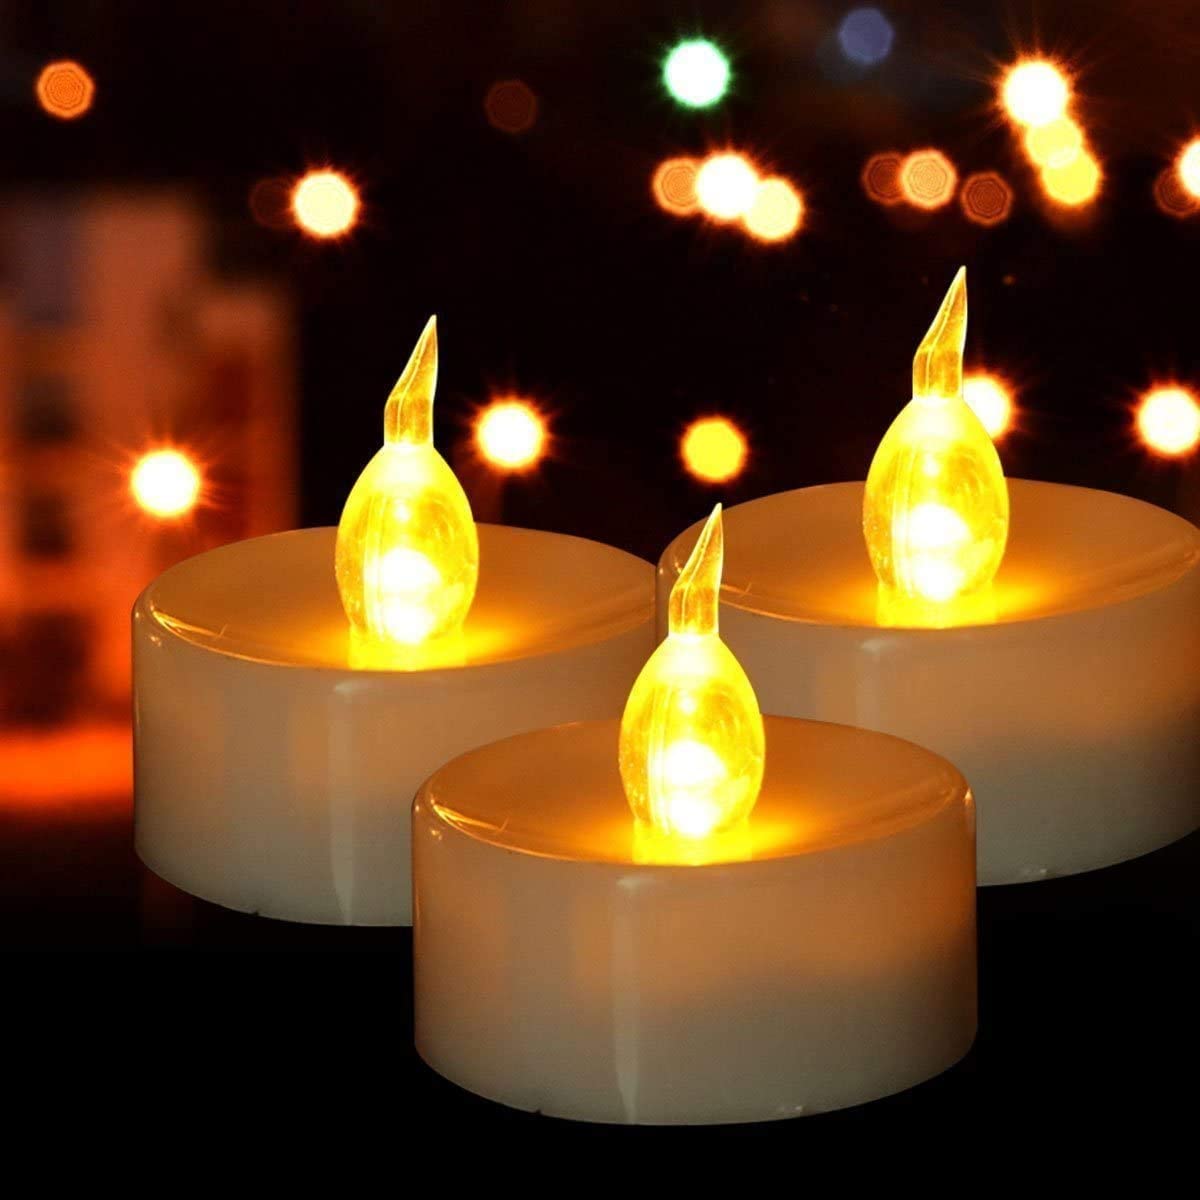 NEWEEN Tea Lights LED 24-Pack Flameless Tealight Candles Battery Candles  Flickering Electric Tea Candles for Decoration,Pumpkin  Lights,Holiday,Anniversary,Wedding,Party(Warm Yellow Light） 